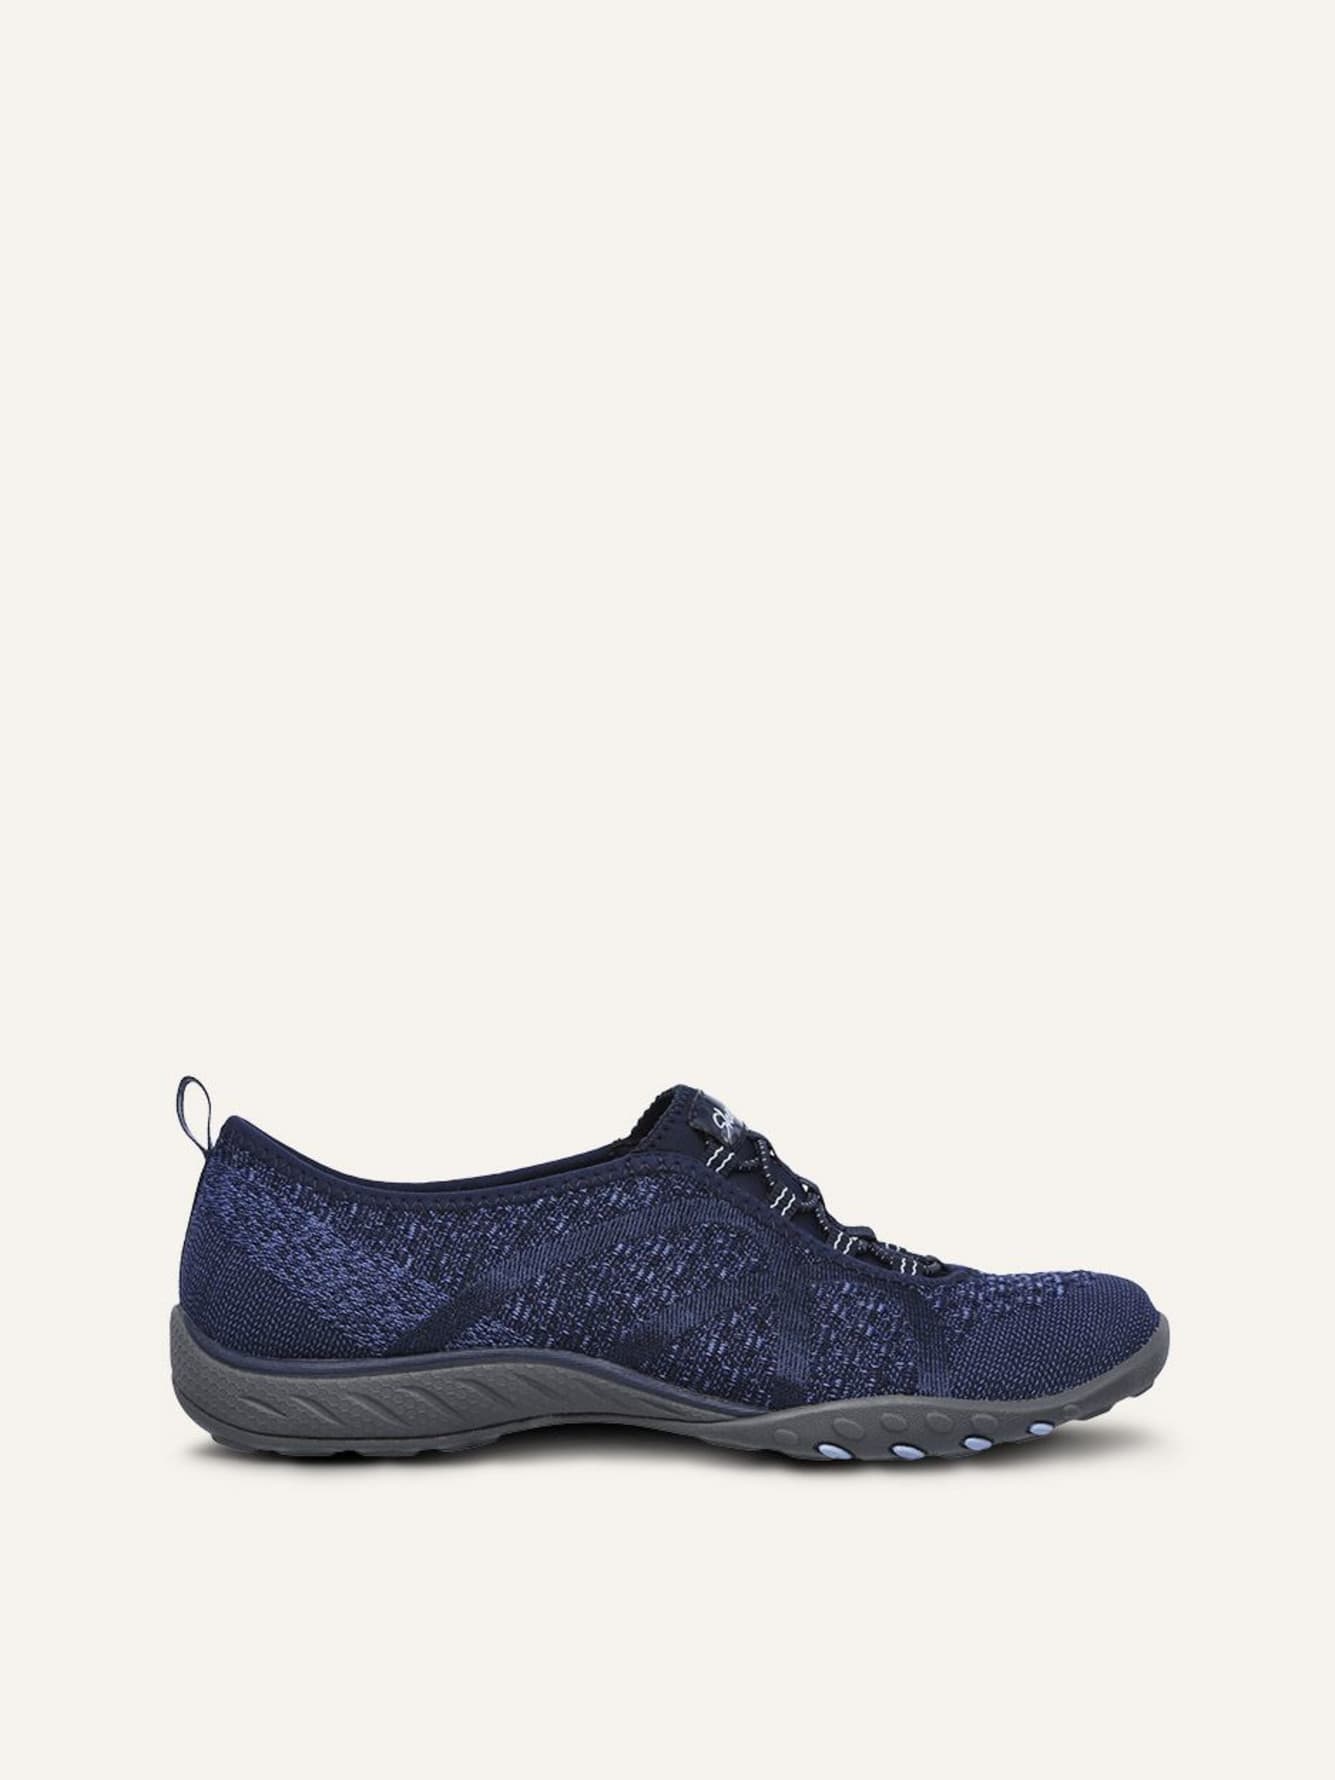 skechers relaxed fit wide